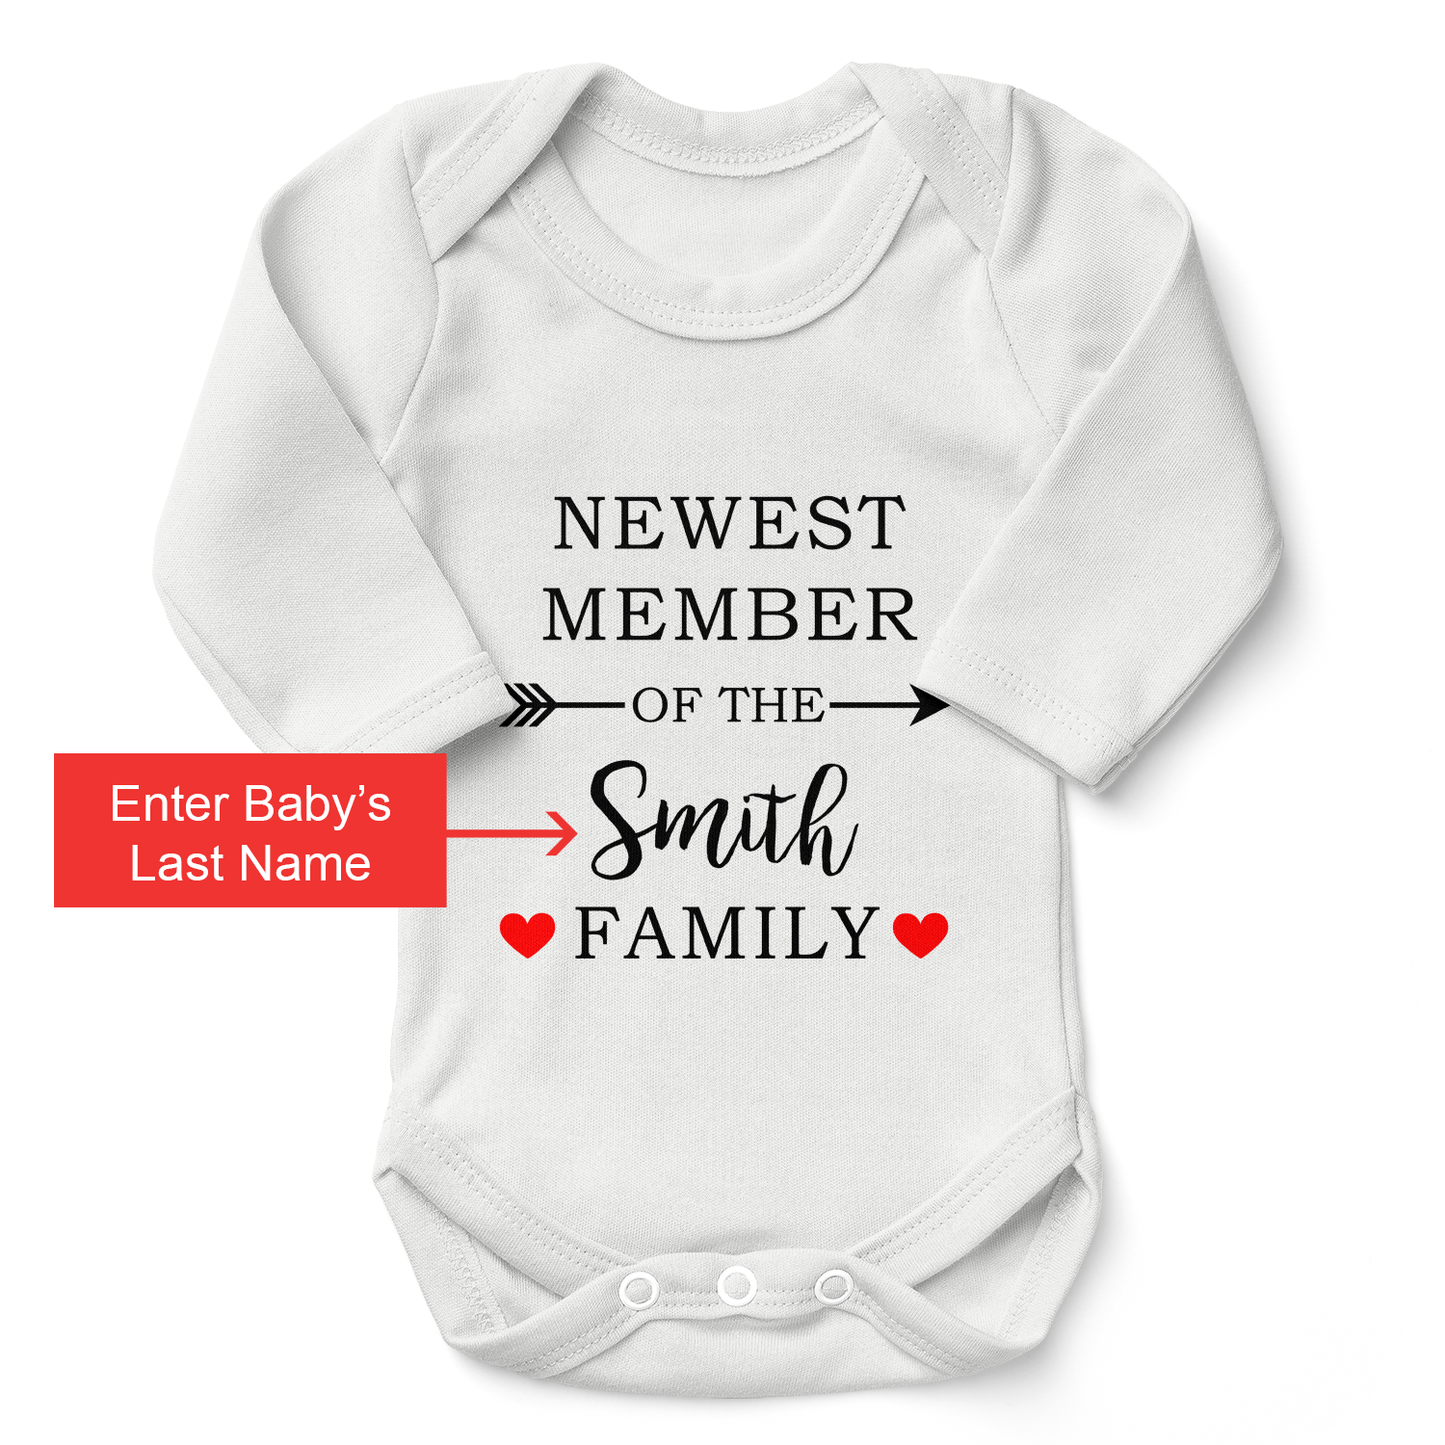 Personalized Organic Baby Bodysuit - Newest Member of the Family (White)